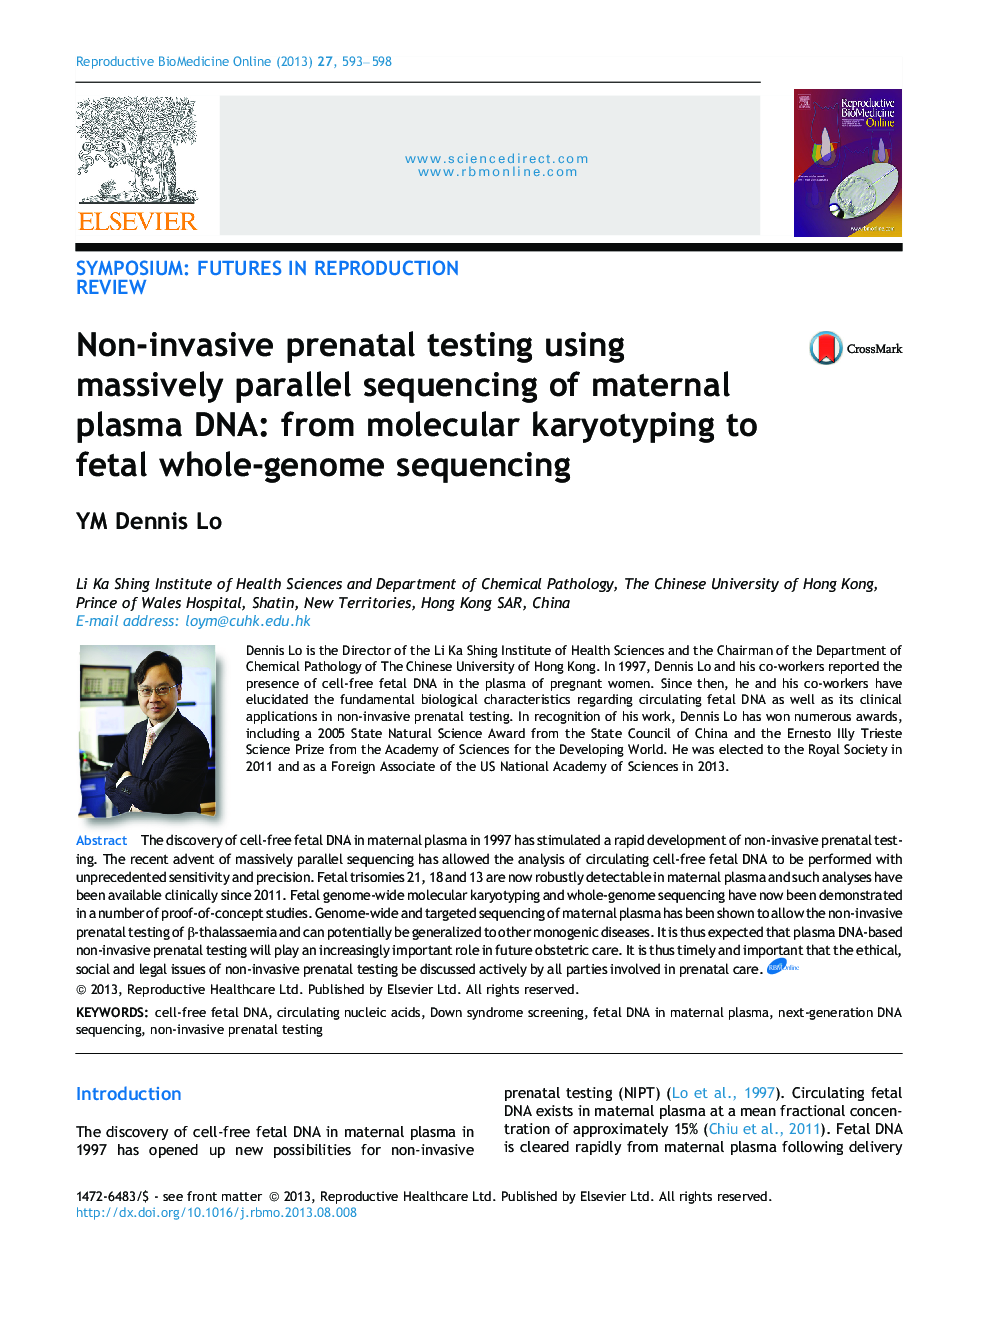 Non-invasive prenatal testing using massively parallel sequencing of maternal plasma DNA: from molecular karyotyping to fetal whole-genome sequencing 